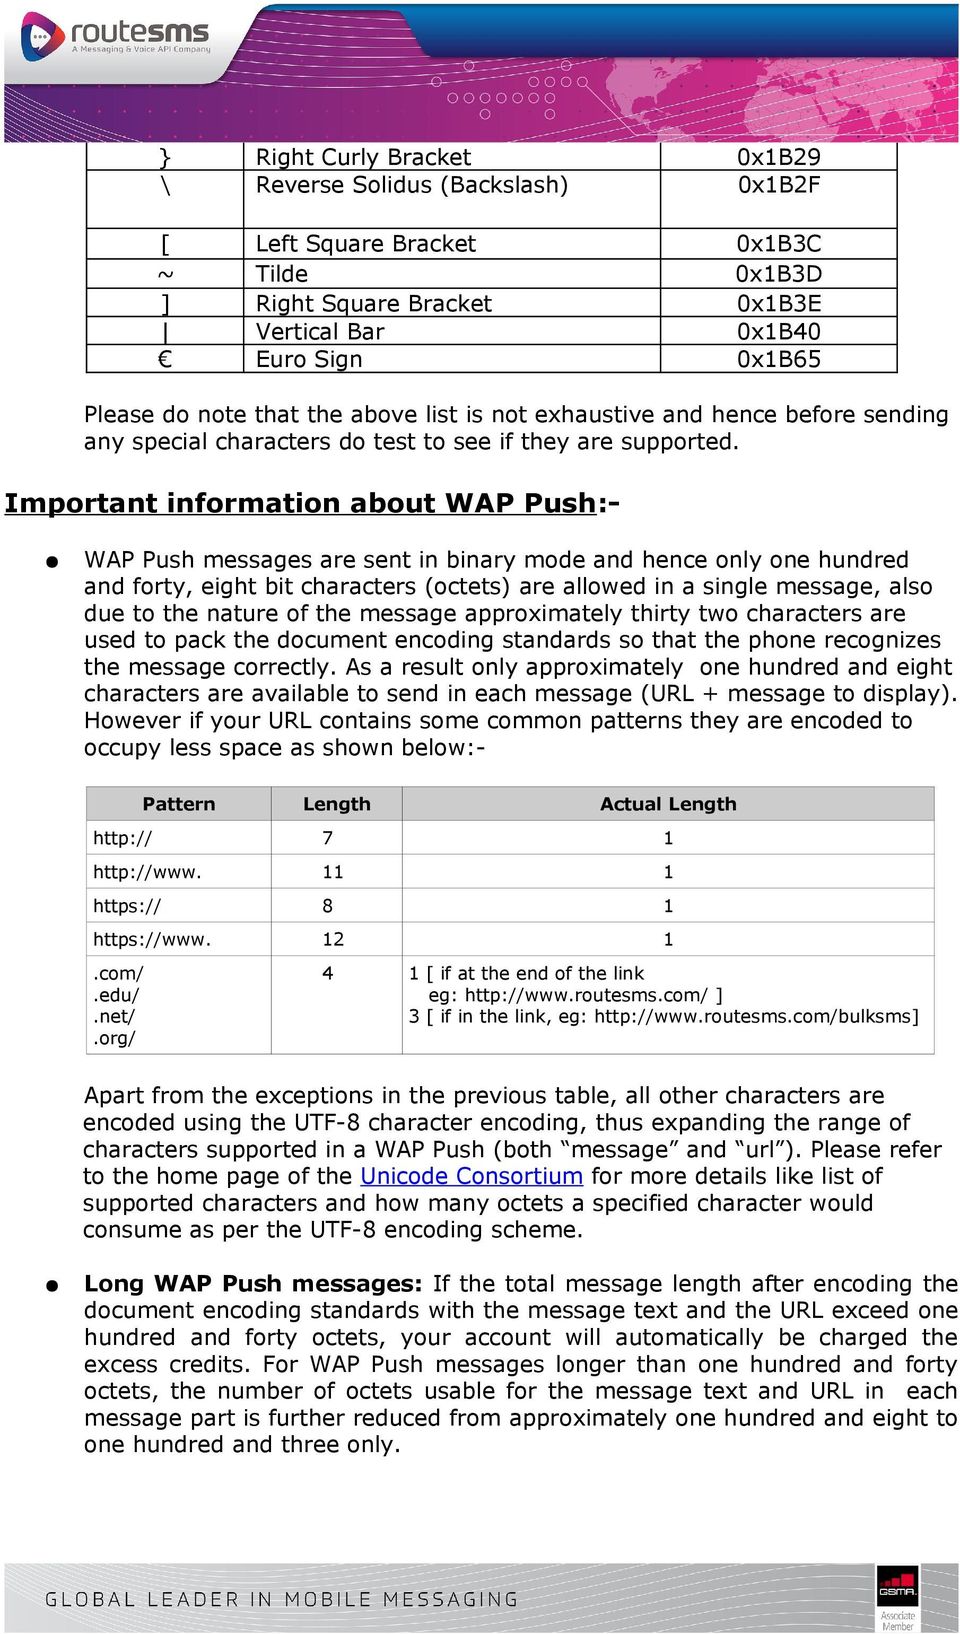 Important information about WAP Push:- WAP Push messages are sent in binary mode and hence only one hundred and forty, eight bit characters (octets) are allowed in a single message, also due to the